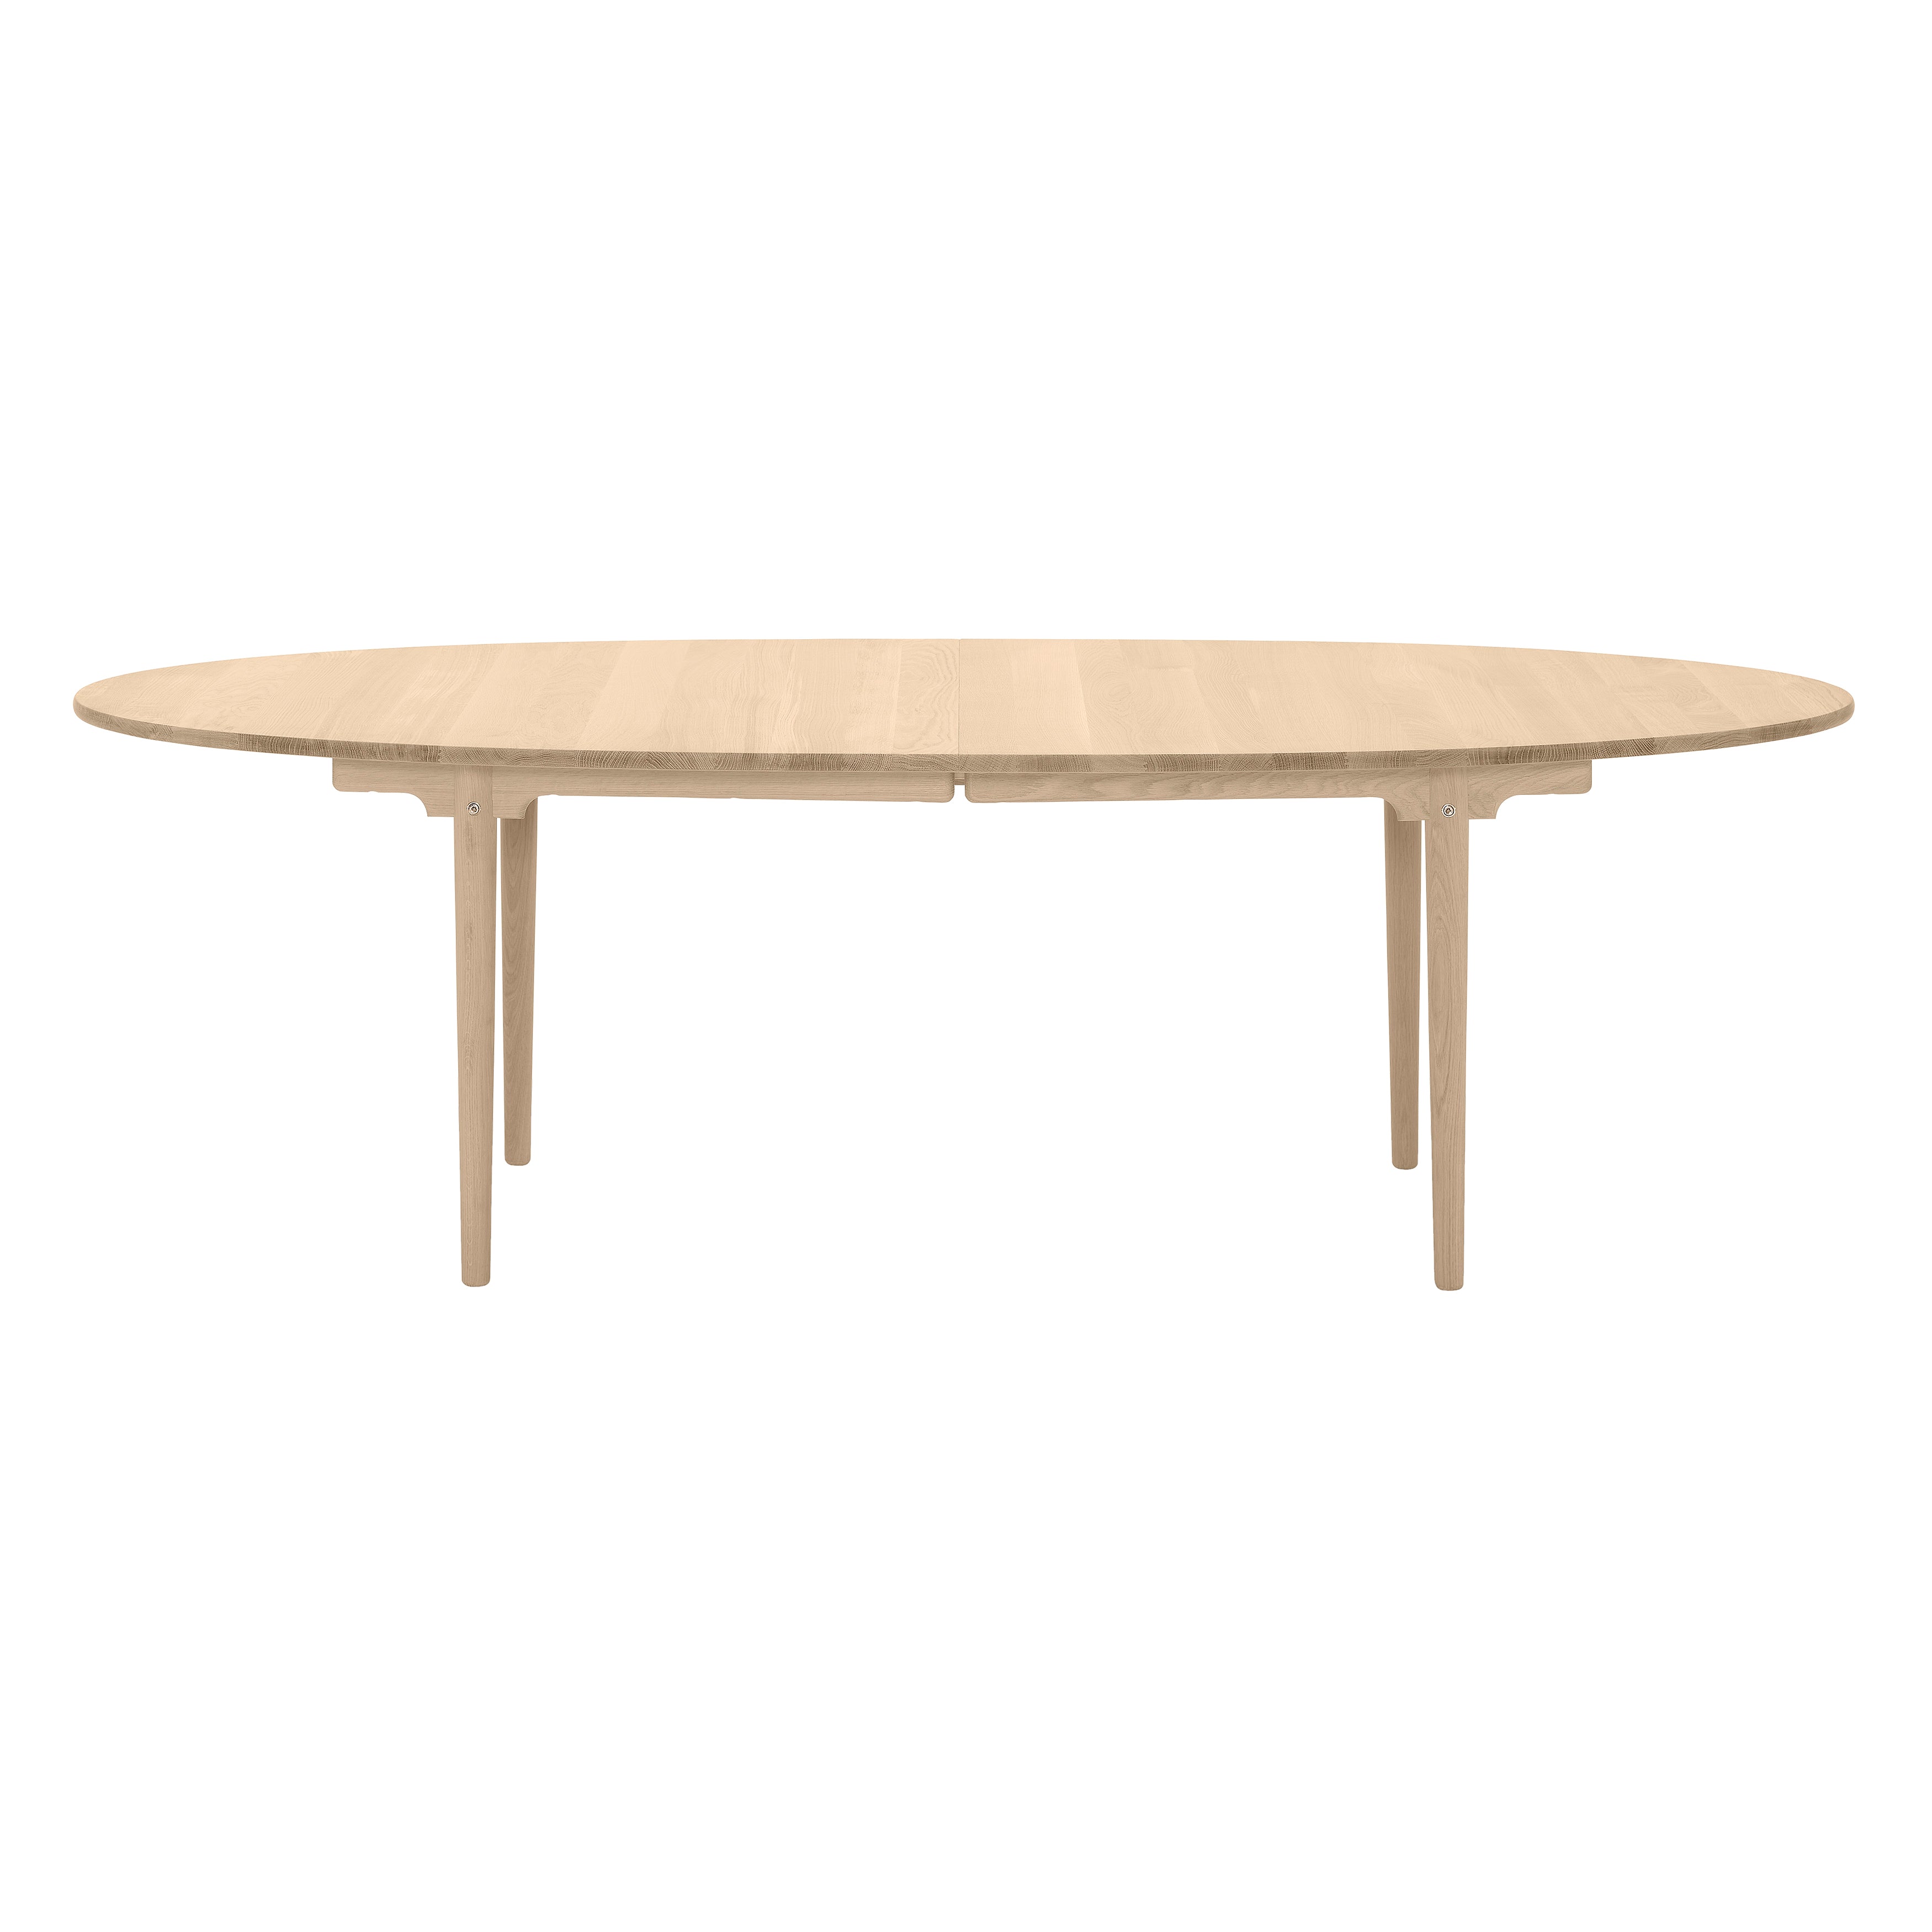 CH339 Dining Table: Oiled Oak